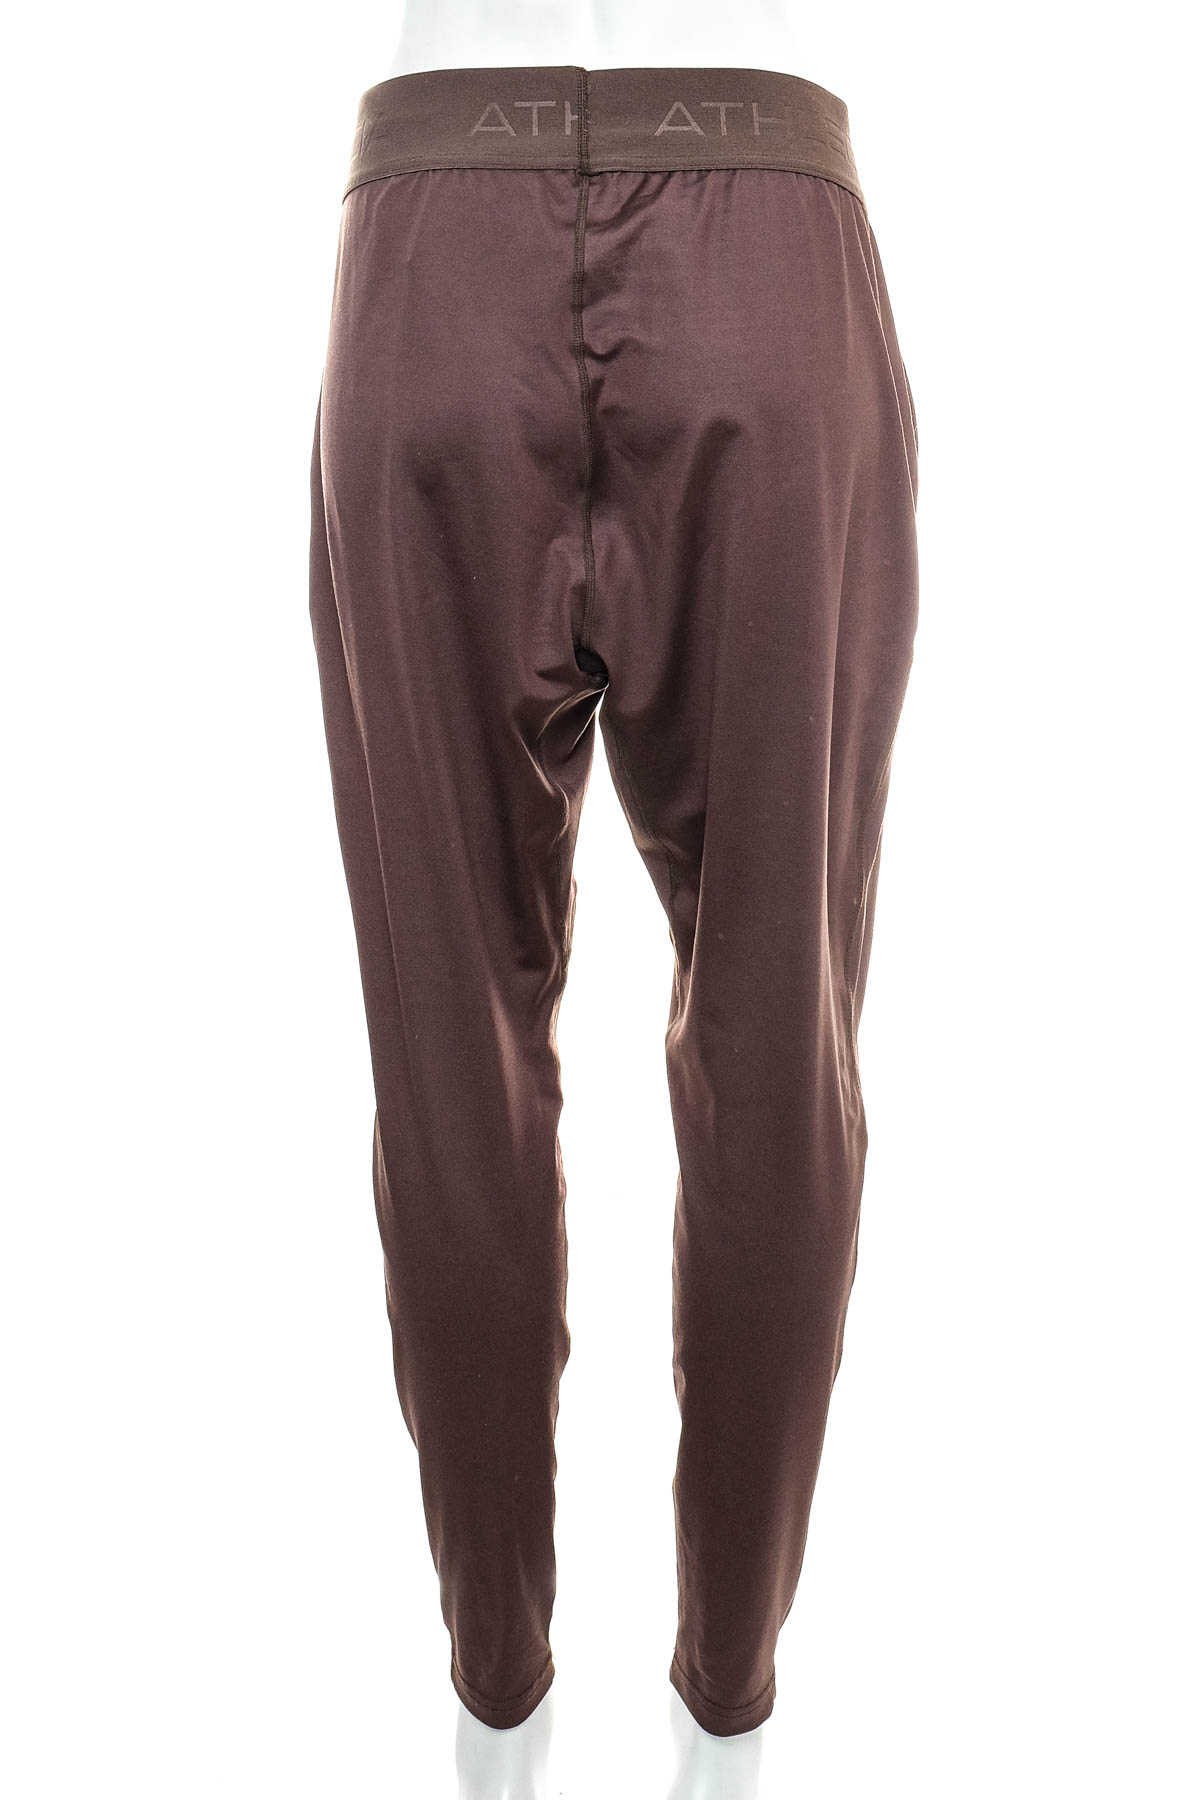 Women's trousers - ATHLECIA - 1